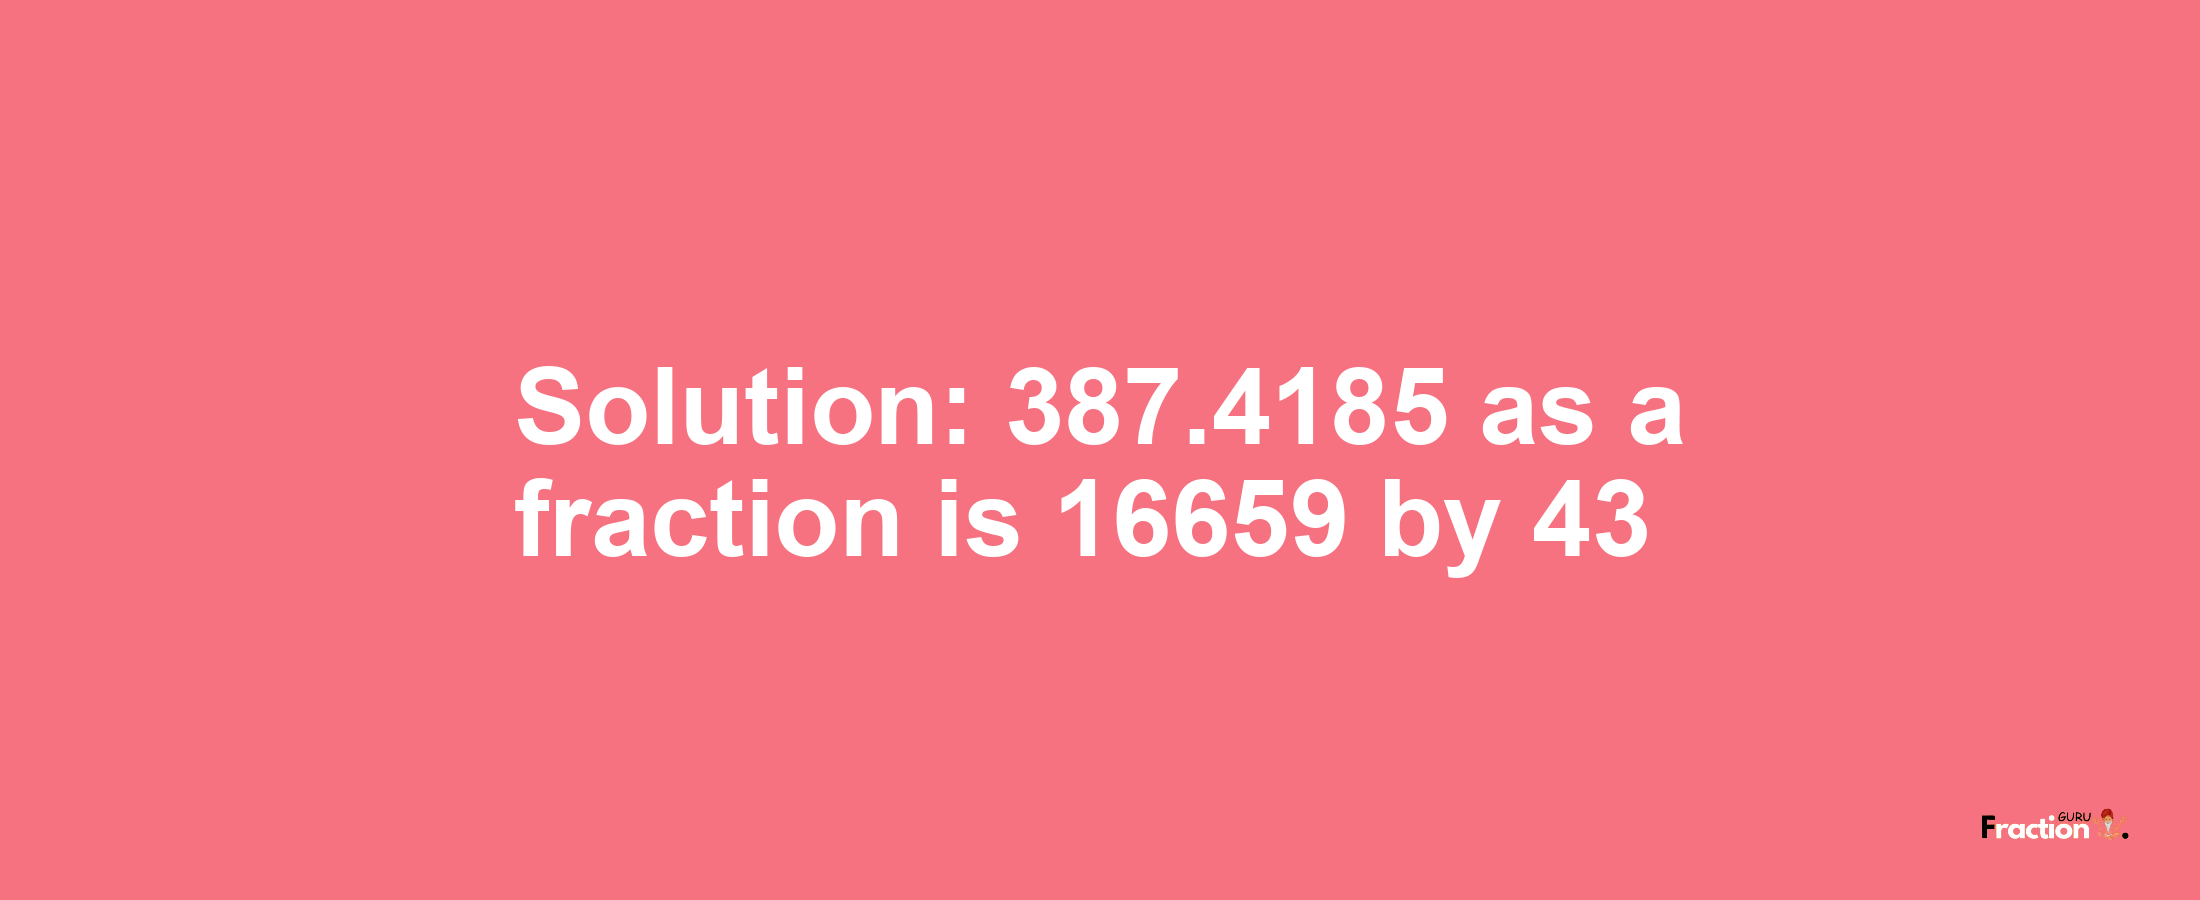 Solution:387.4185 as a fraction is 16659/43